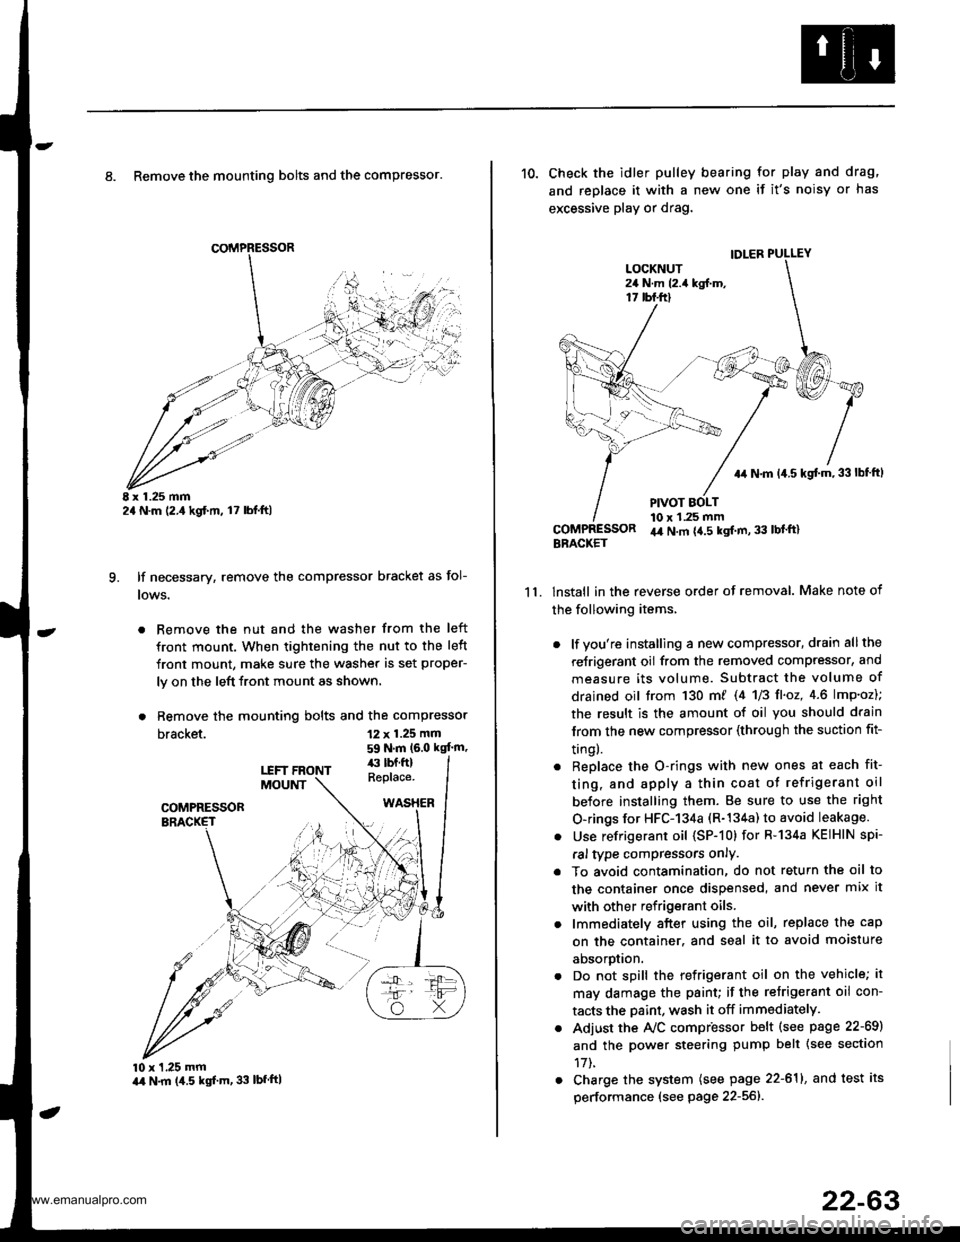 HONDA CR-V 1998 RD1-RD3 / 1.G Workshop Manual 
8. Remove the mounting bolts and the compressor.
E x 1.25 mm2a N.m (2.,1kgf.m, l7 lbl.ft)
lf necessary, remove the compressor bracket as fol-
lows.
. Remove the nut and the washer from the left
front